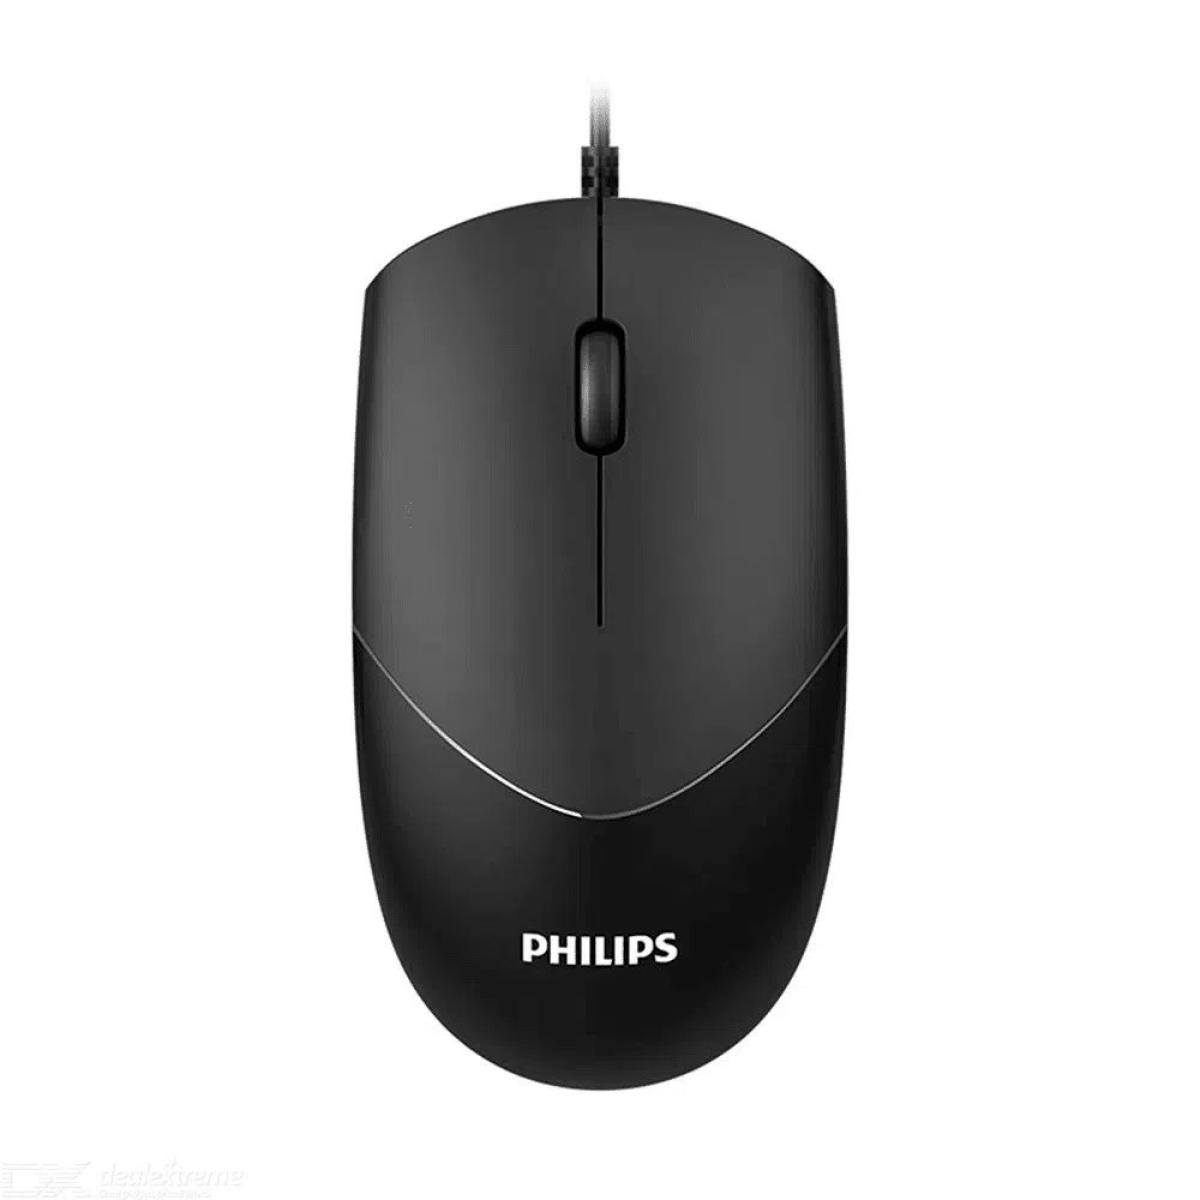 Philips M244 Wired USB Optical Mouse SPK9304- Black